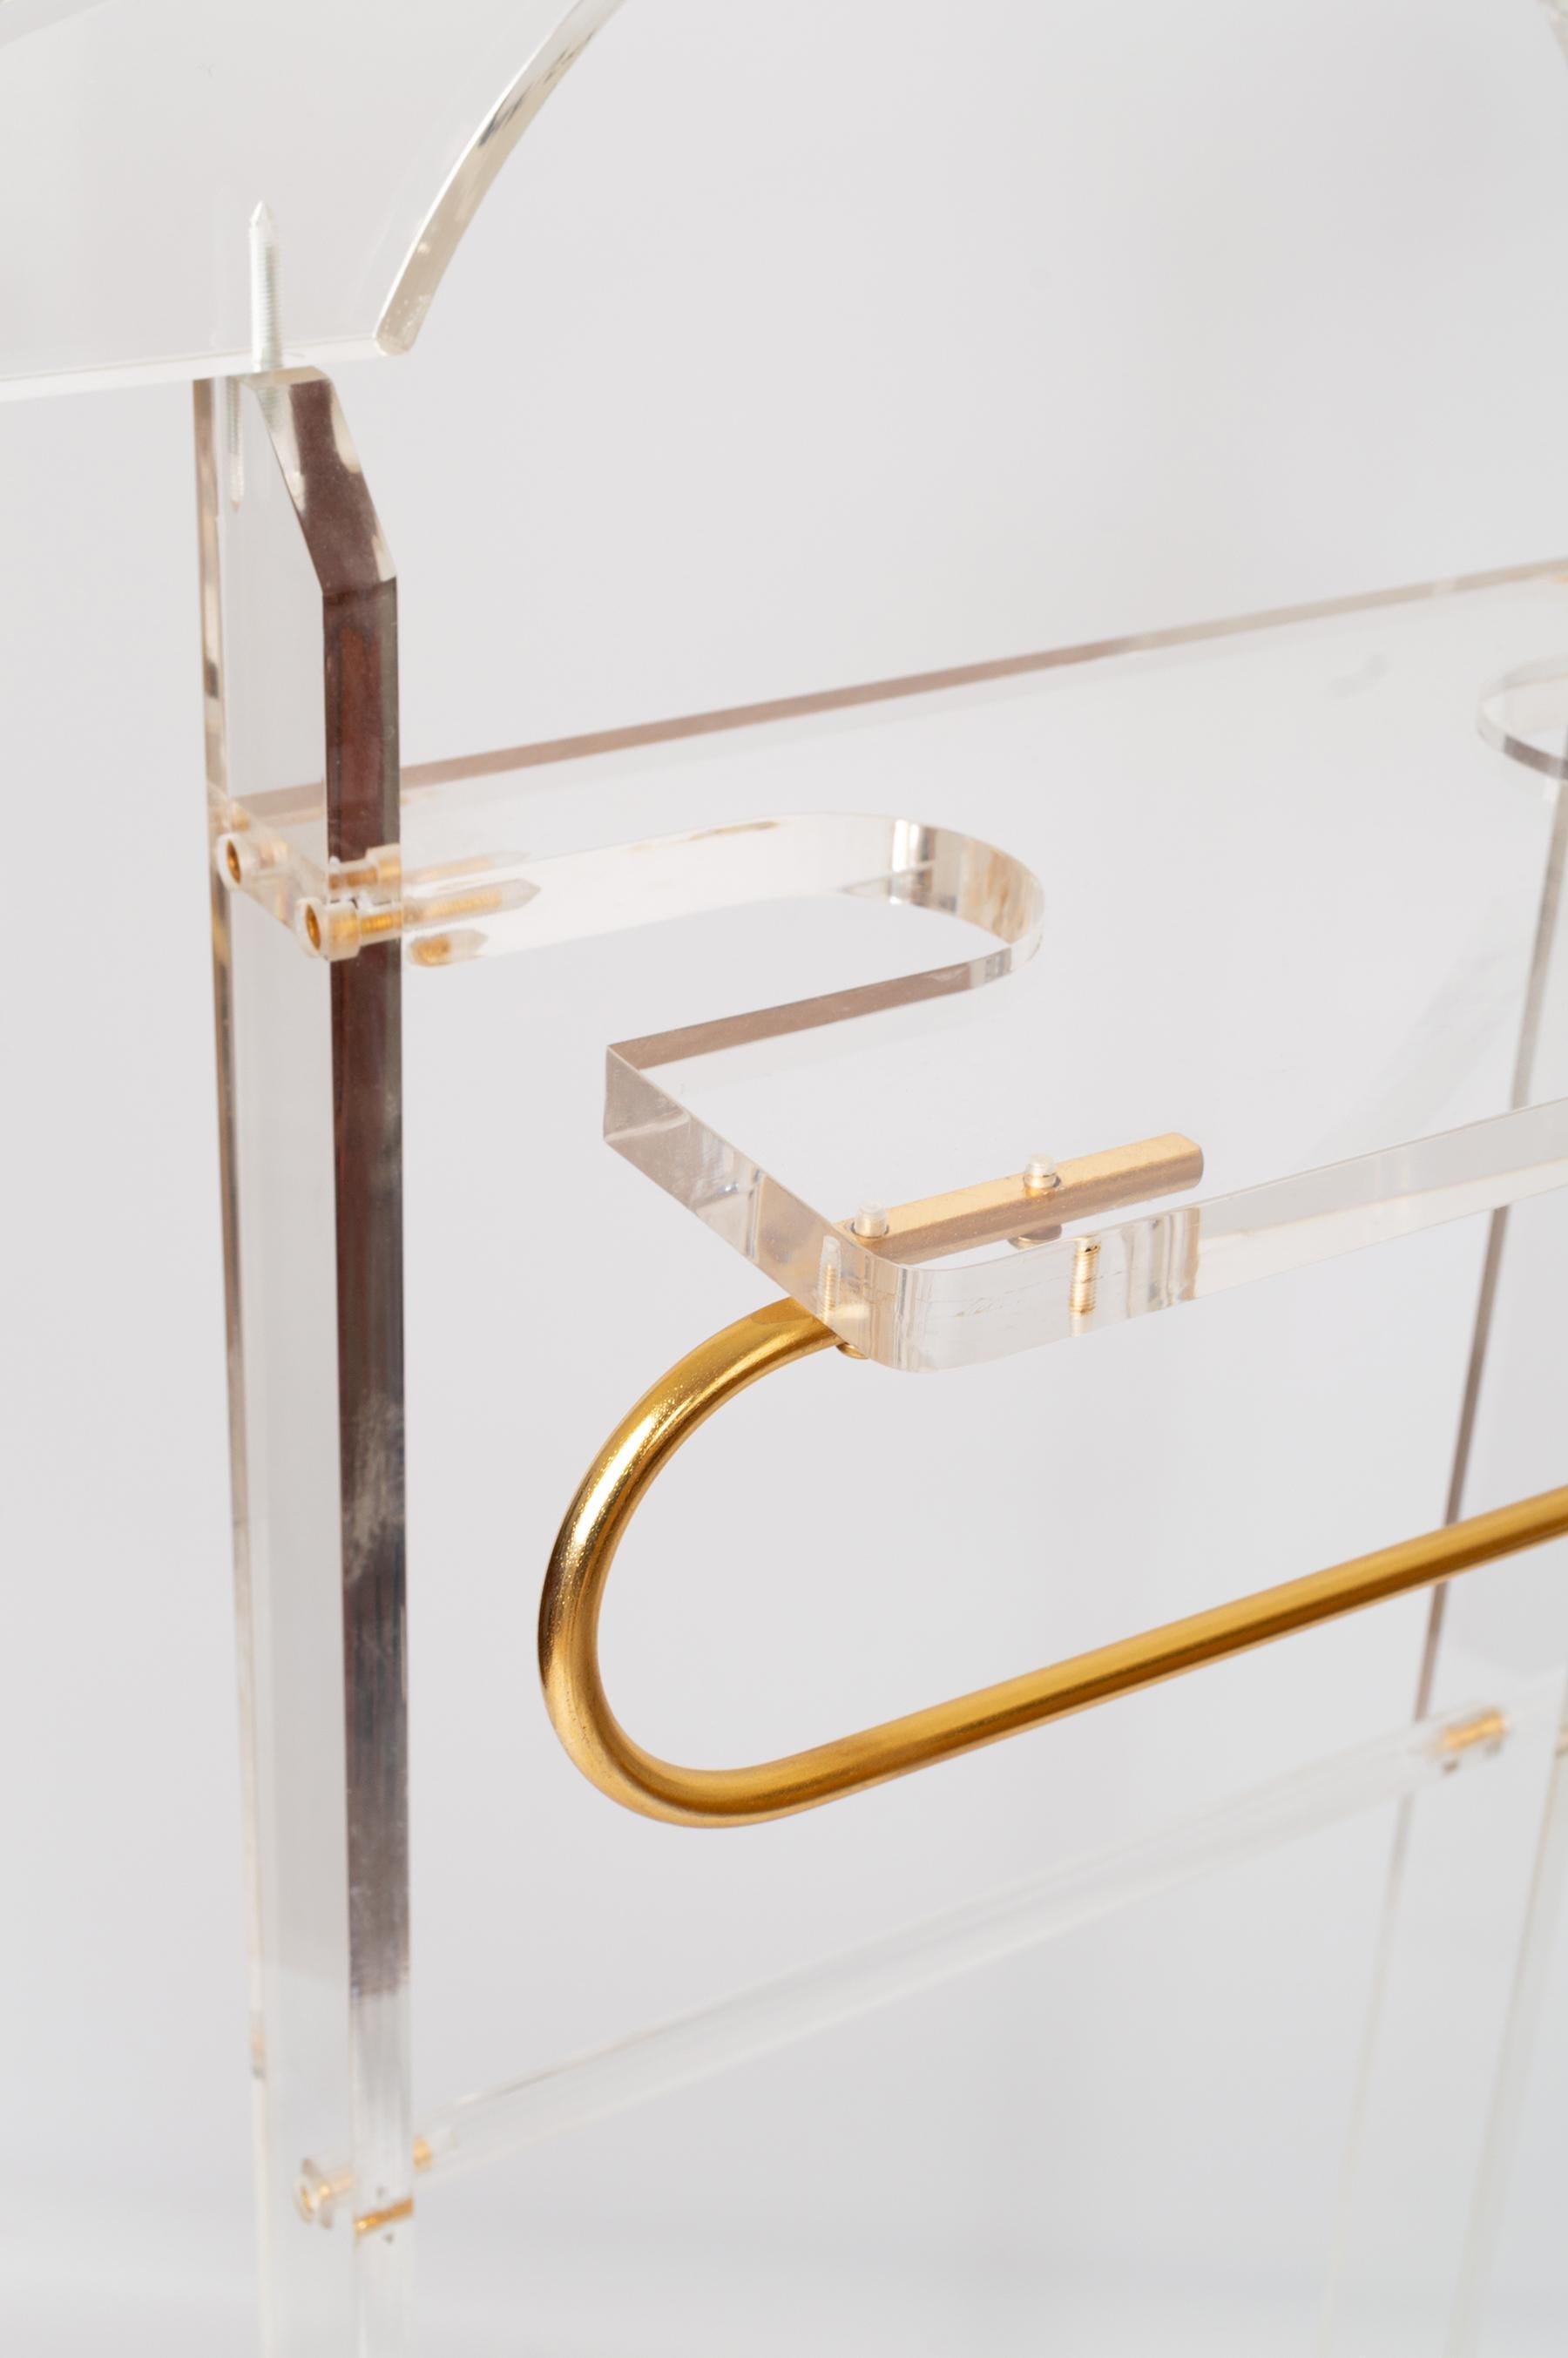 Italian Midcentury Lucite and Brass Valet Stand, Italy, circa 1960